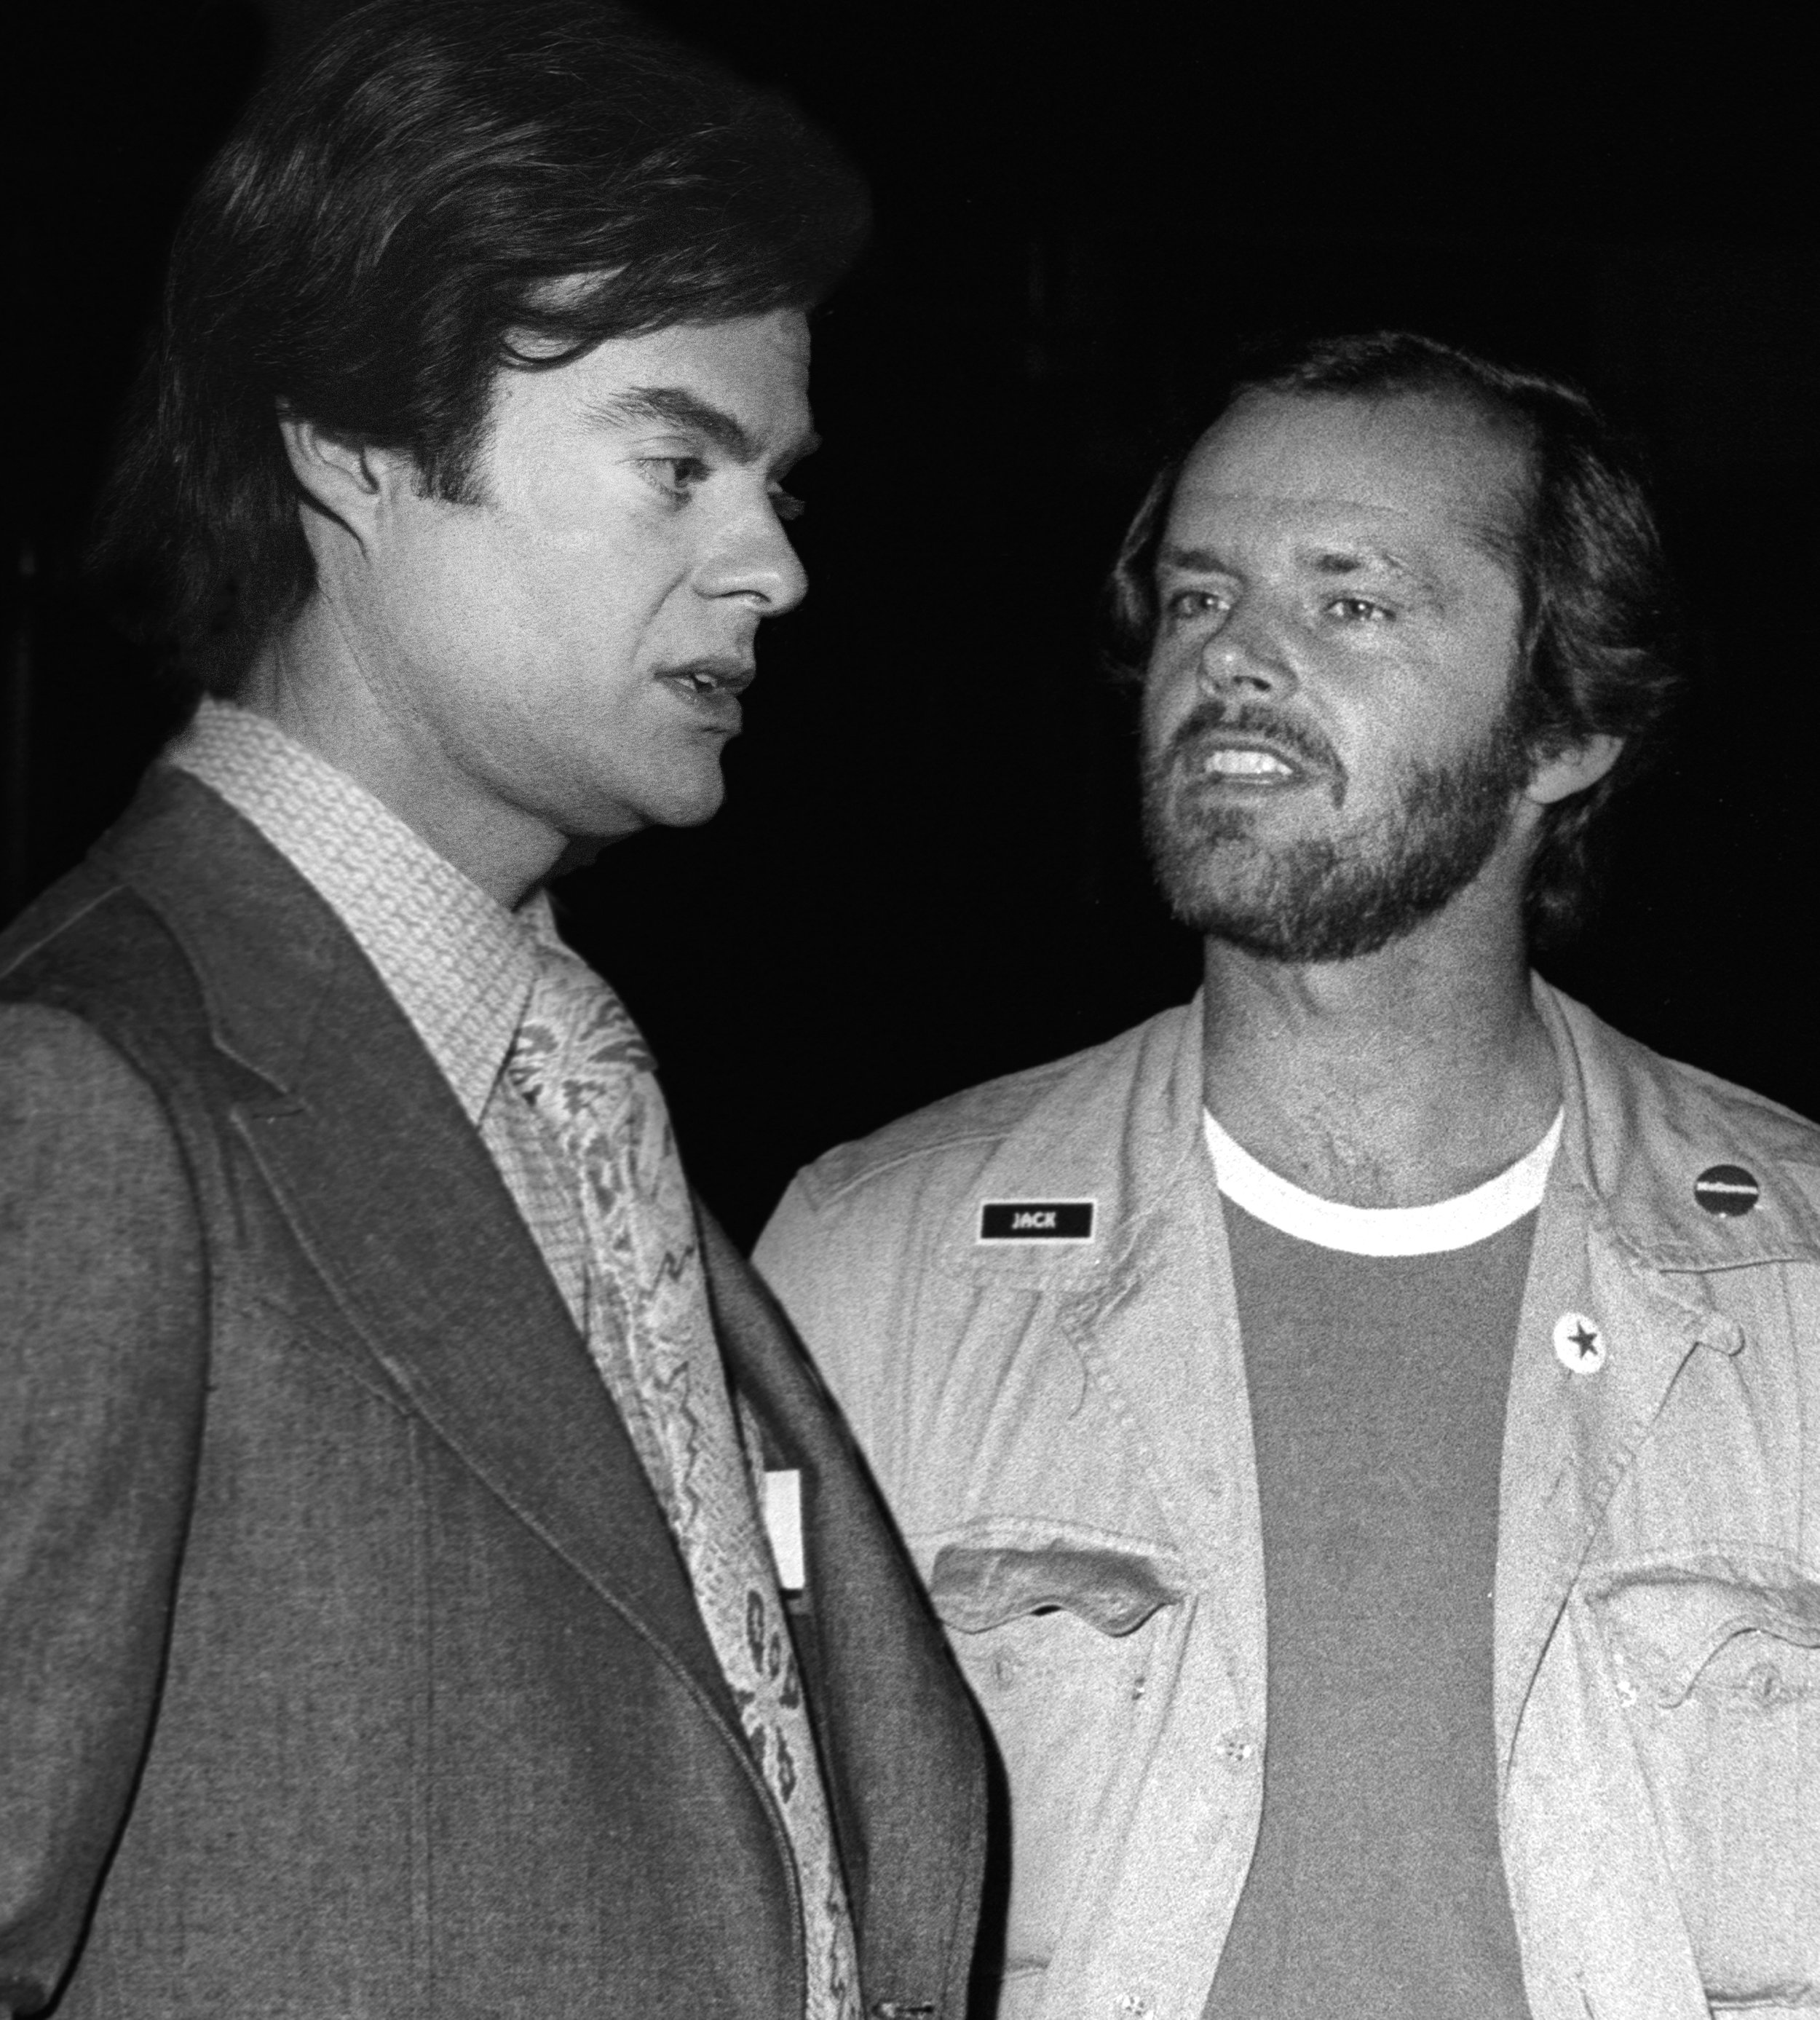 Jerry with Jack Nicholson  [Photo Composite]